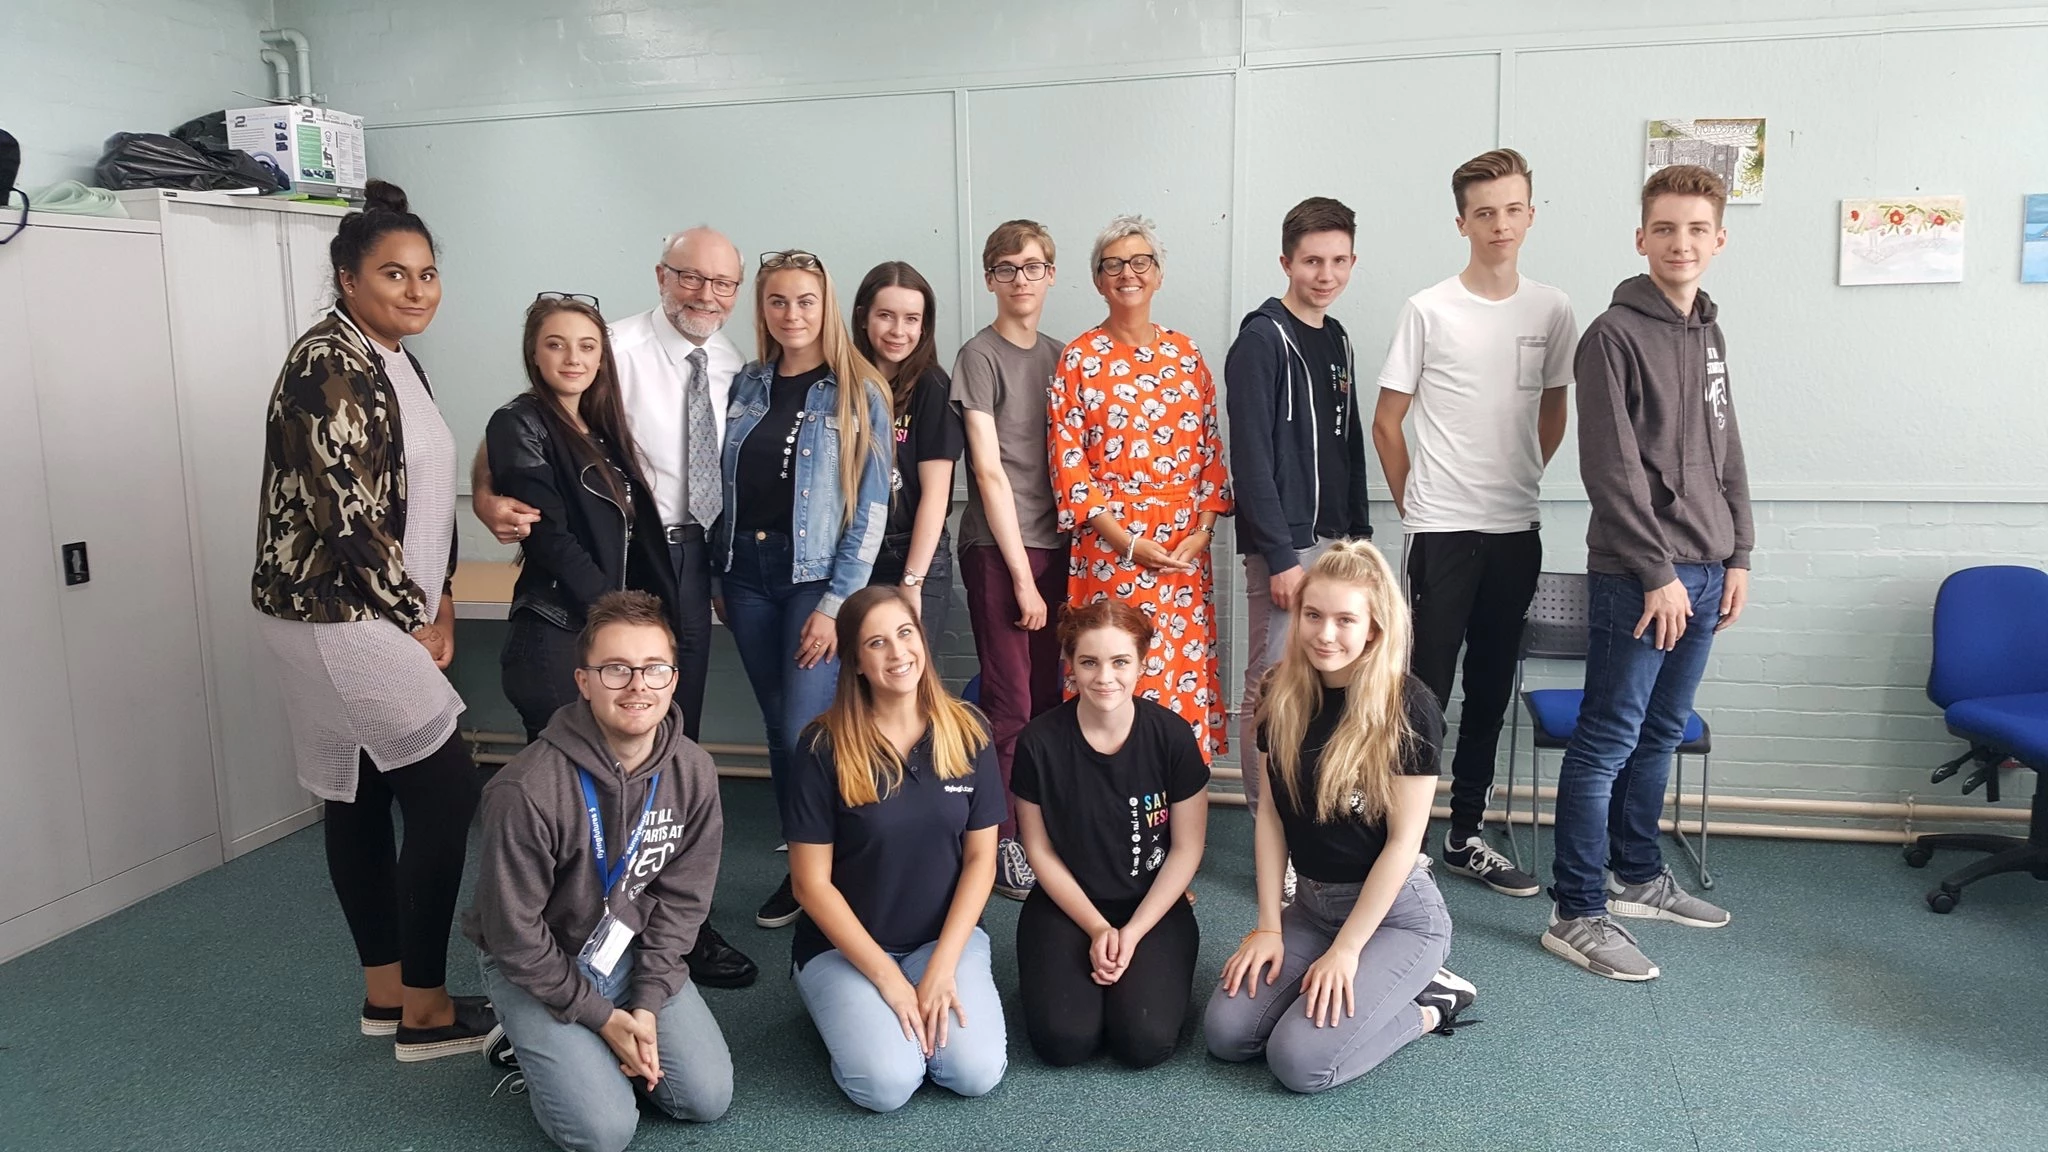 Alex Cunningham MP met NCS participants in Stockton-on-Tees